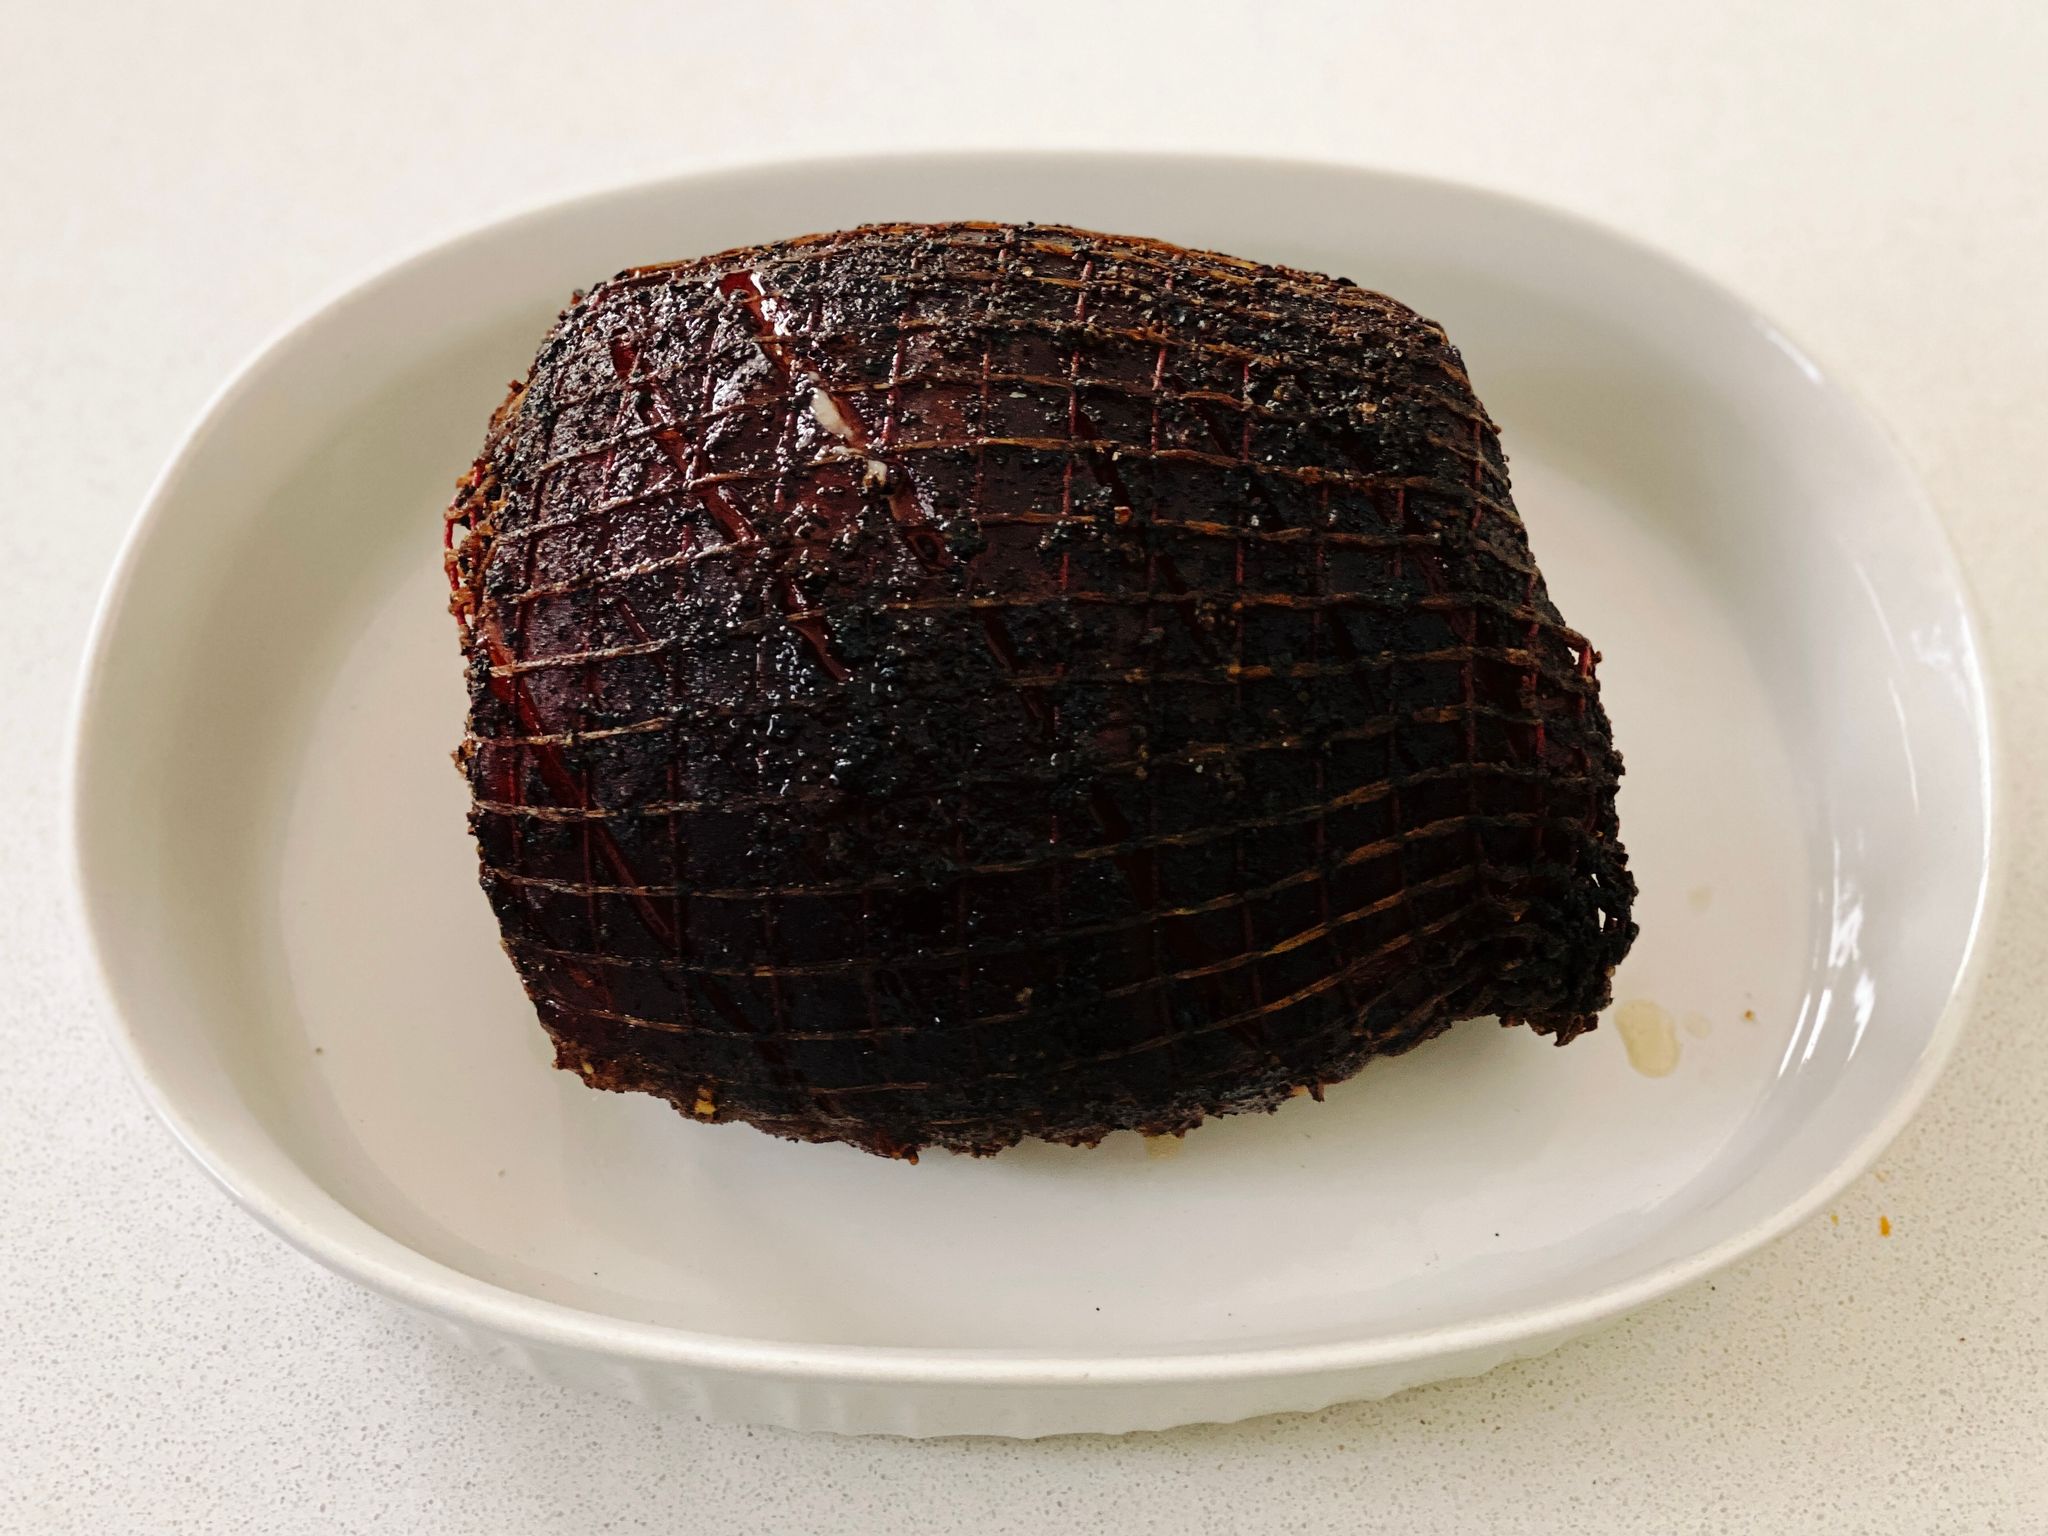 A photo of a cooked pork shoulder still in its netting. The fat layer is on top and it's all dark brown and delicious-looking.